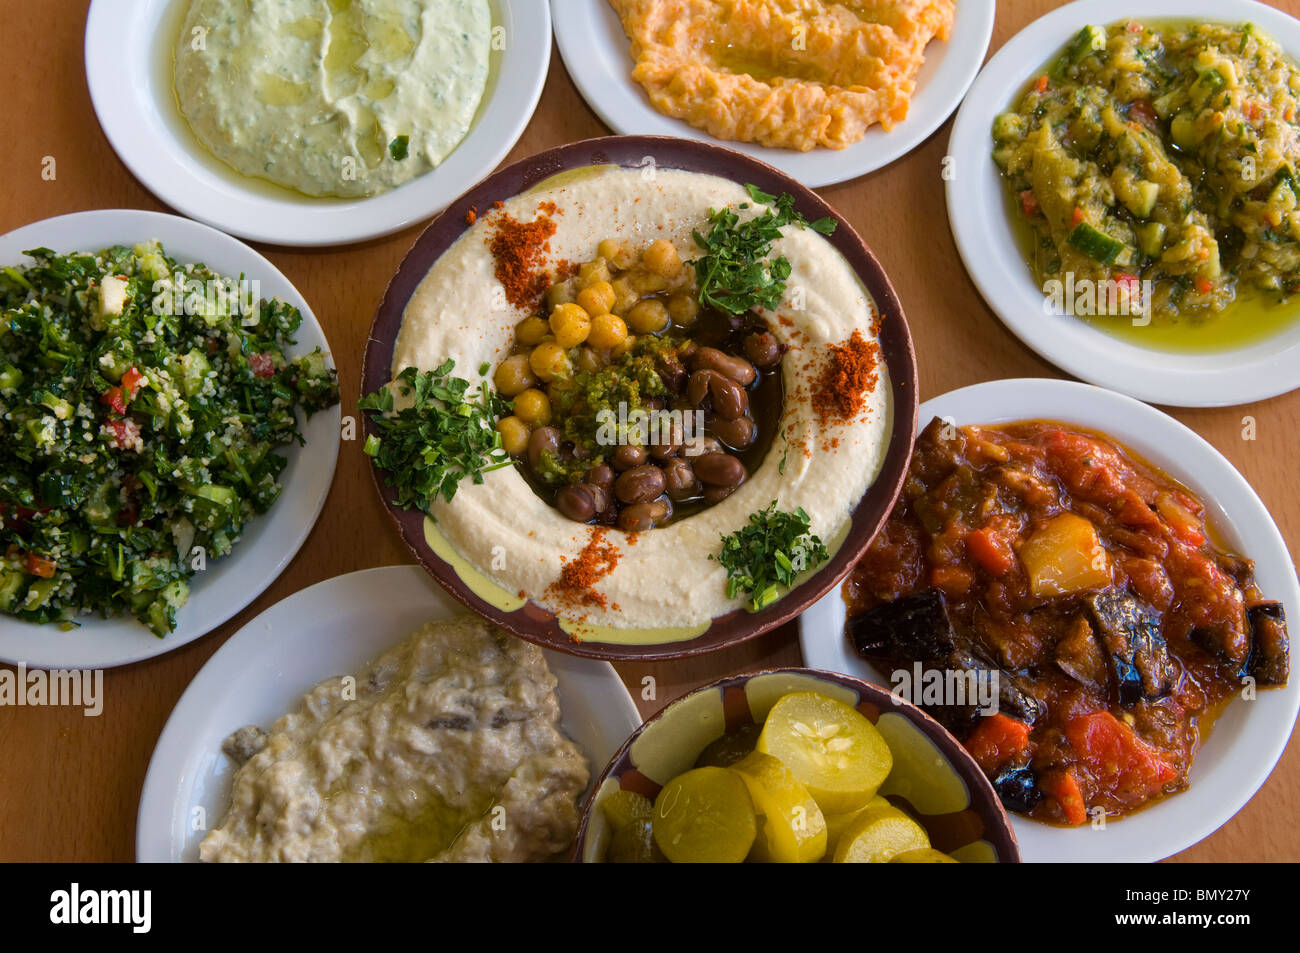 Plate of Hummus with Ful or Foul brown fava beans with all sort of Mediterranean typical mezze salads served in a restaurant Israel Stock Photo